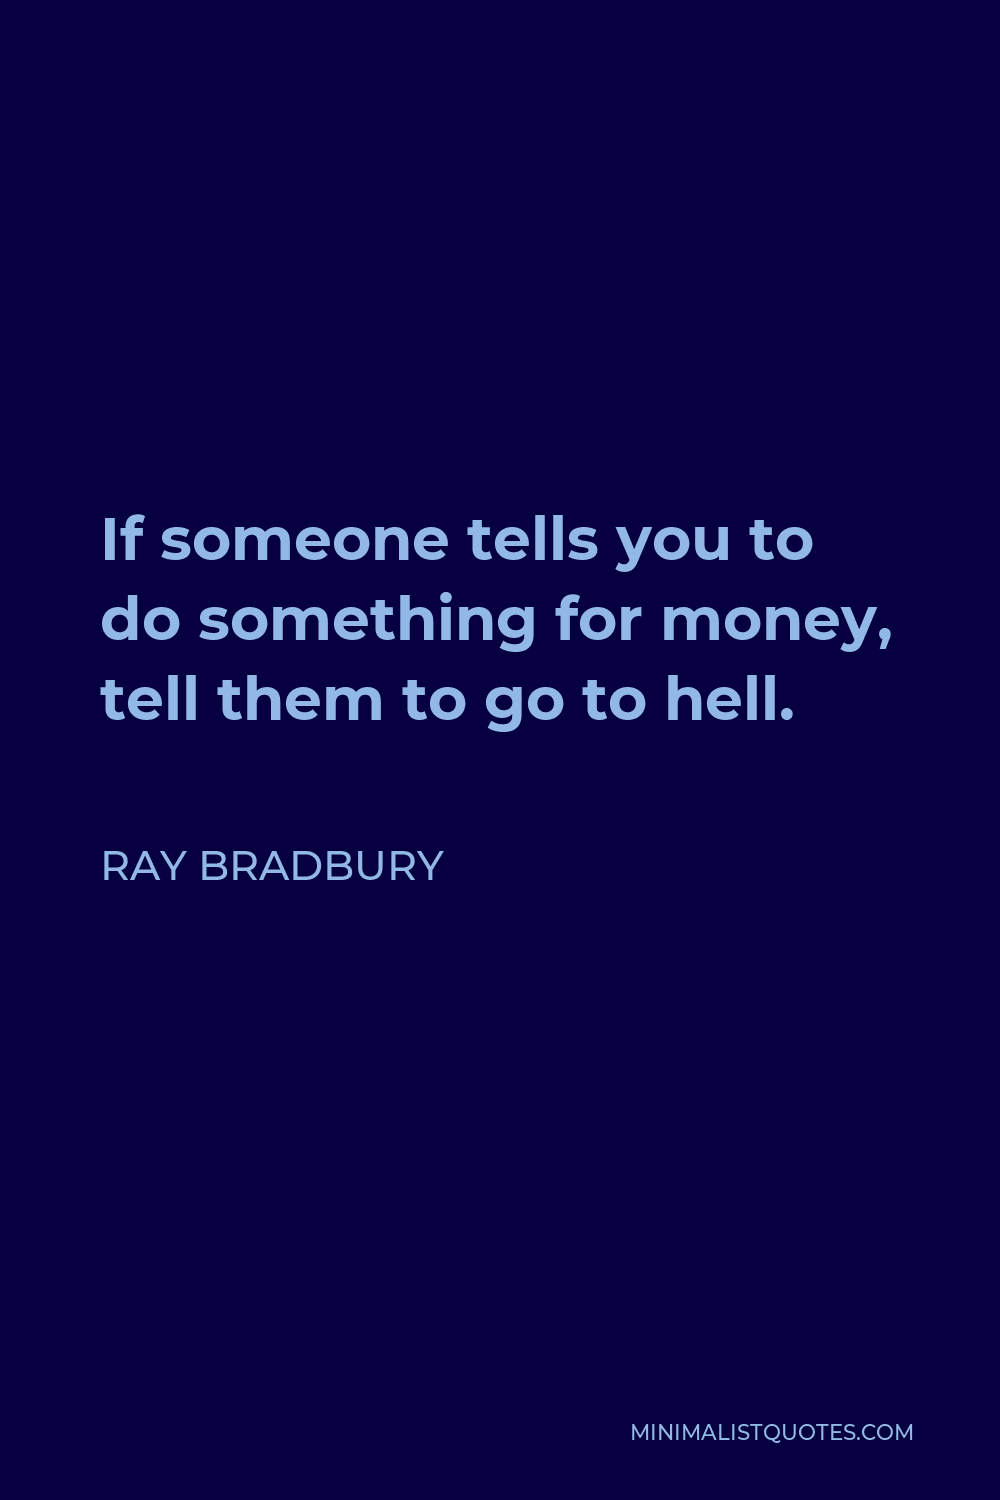 Ray Bradbury Quote - If someone tells you to do something for money, tell them to go to hell.